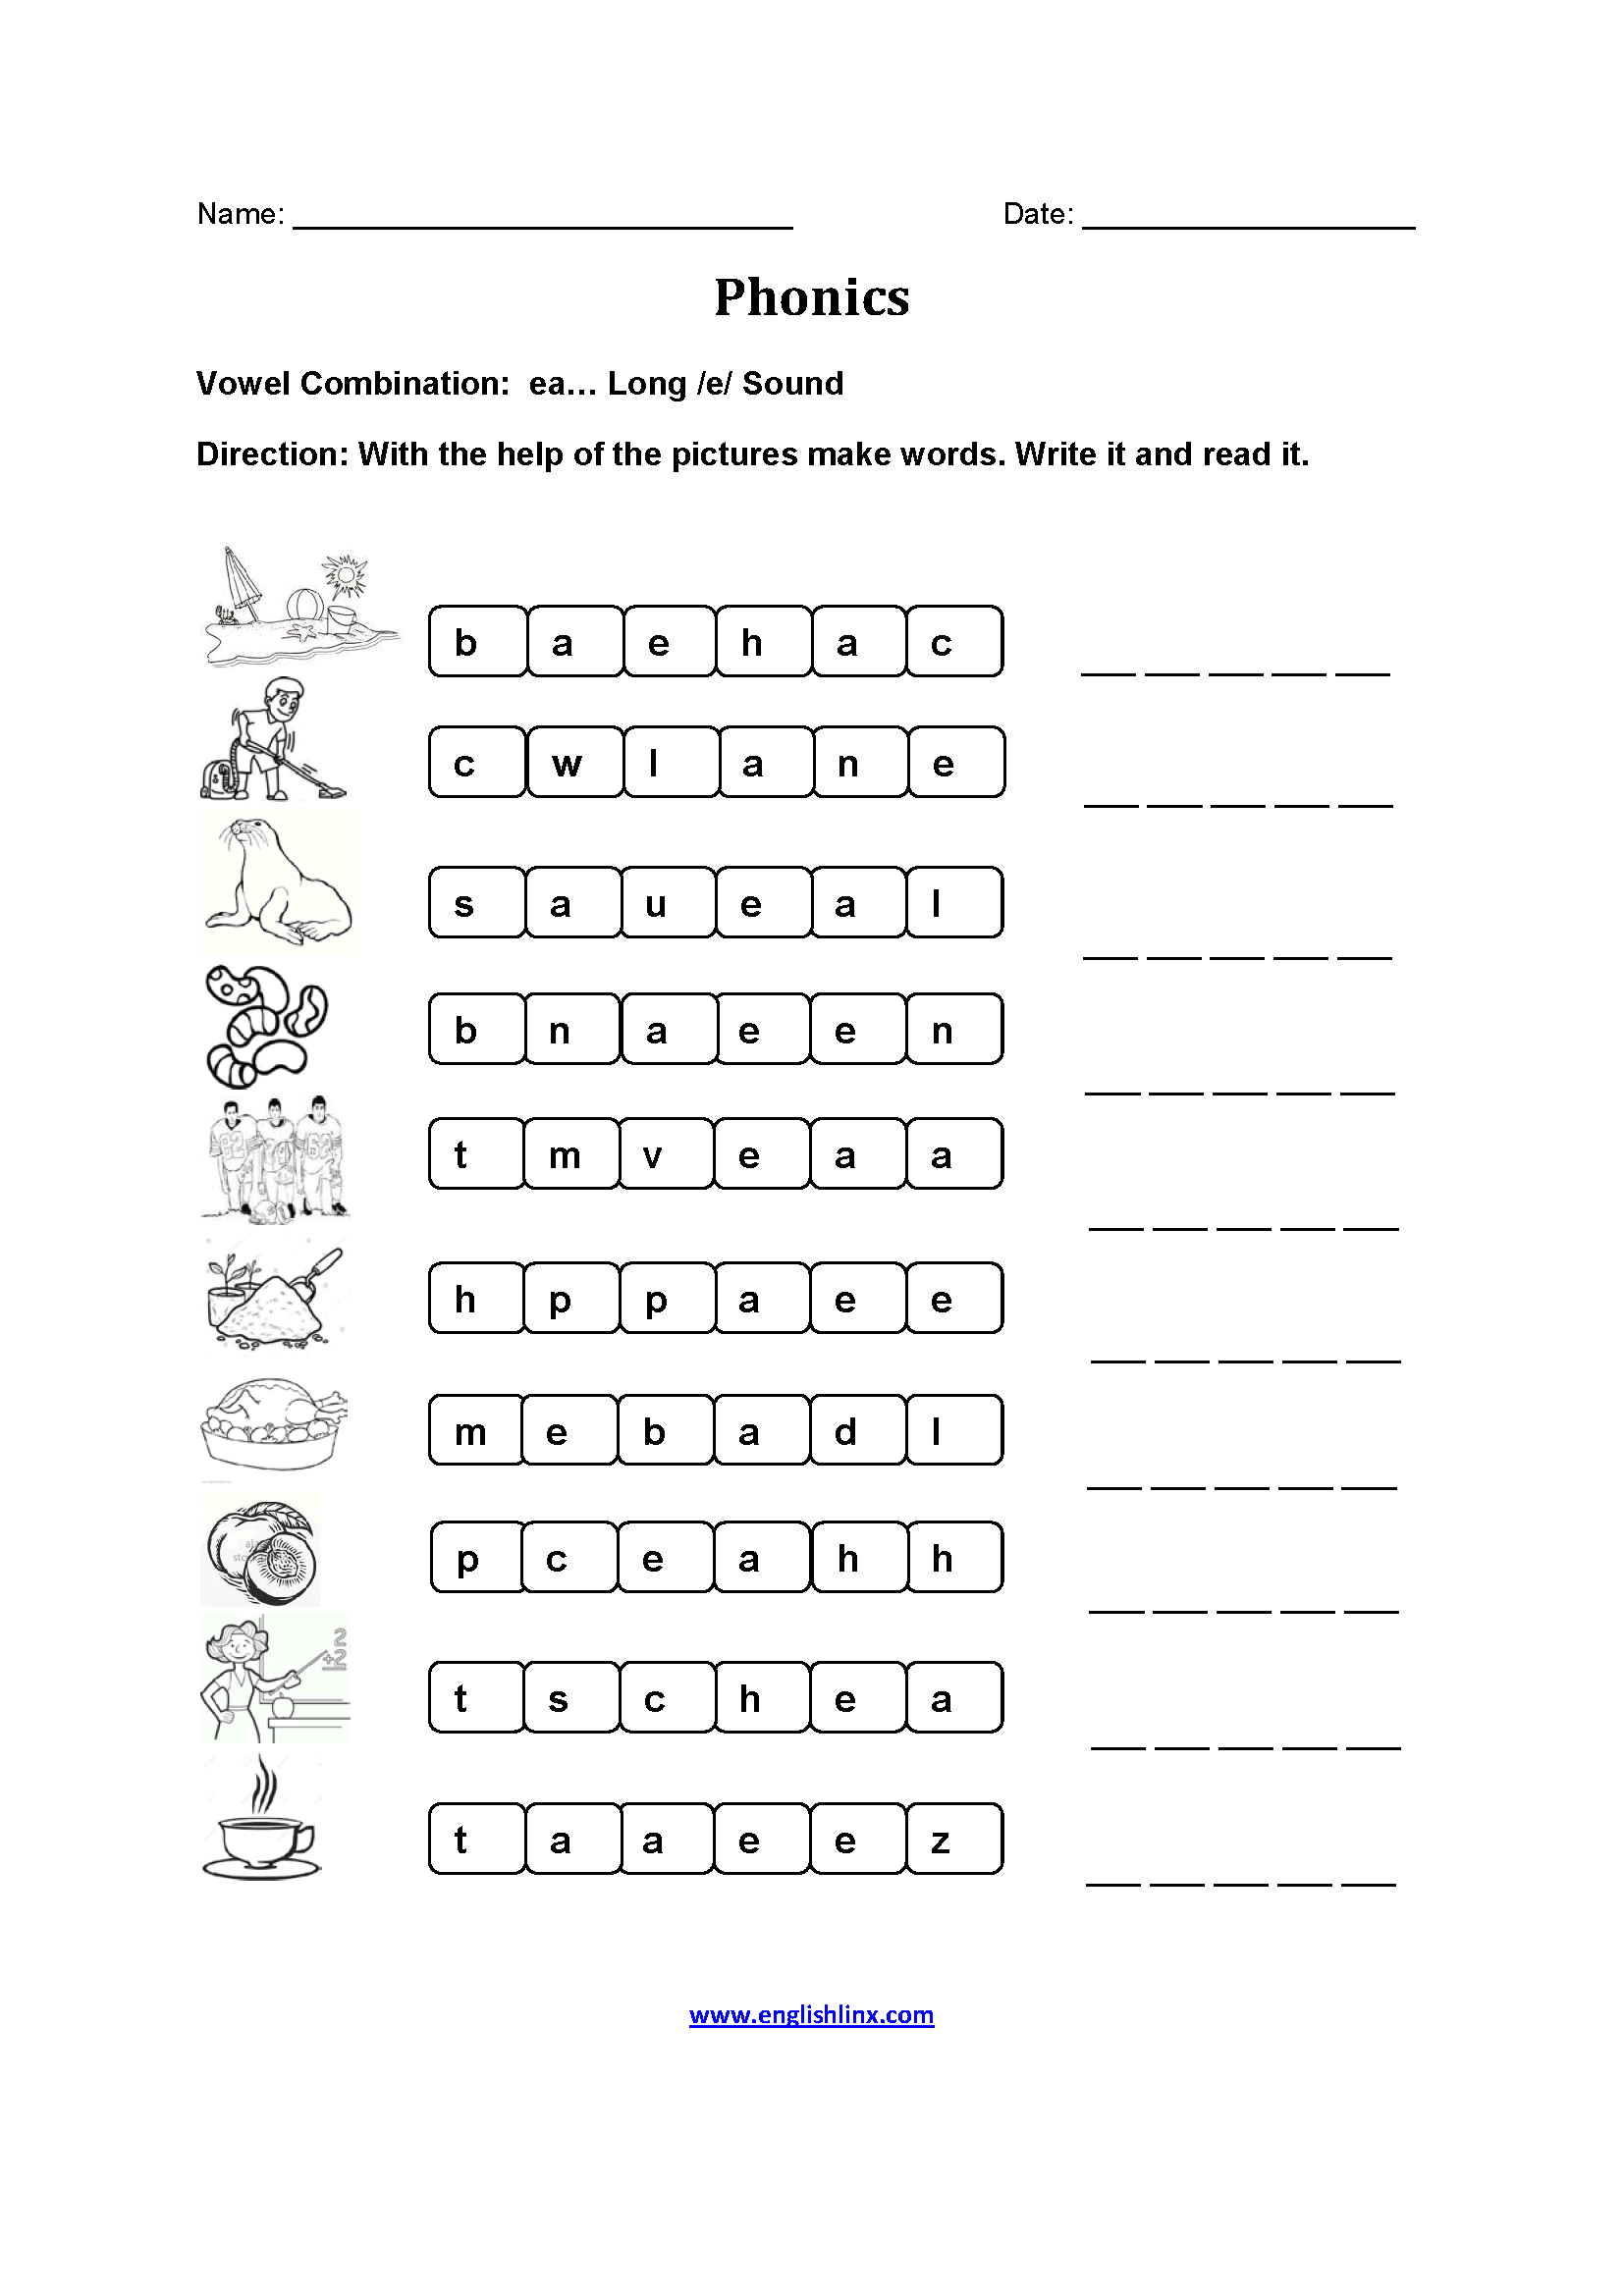 teach-child-how-to-read-phonics-ea-sound-worksheets